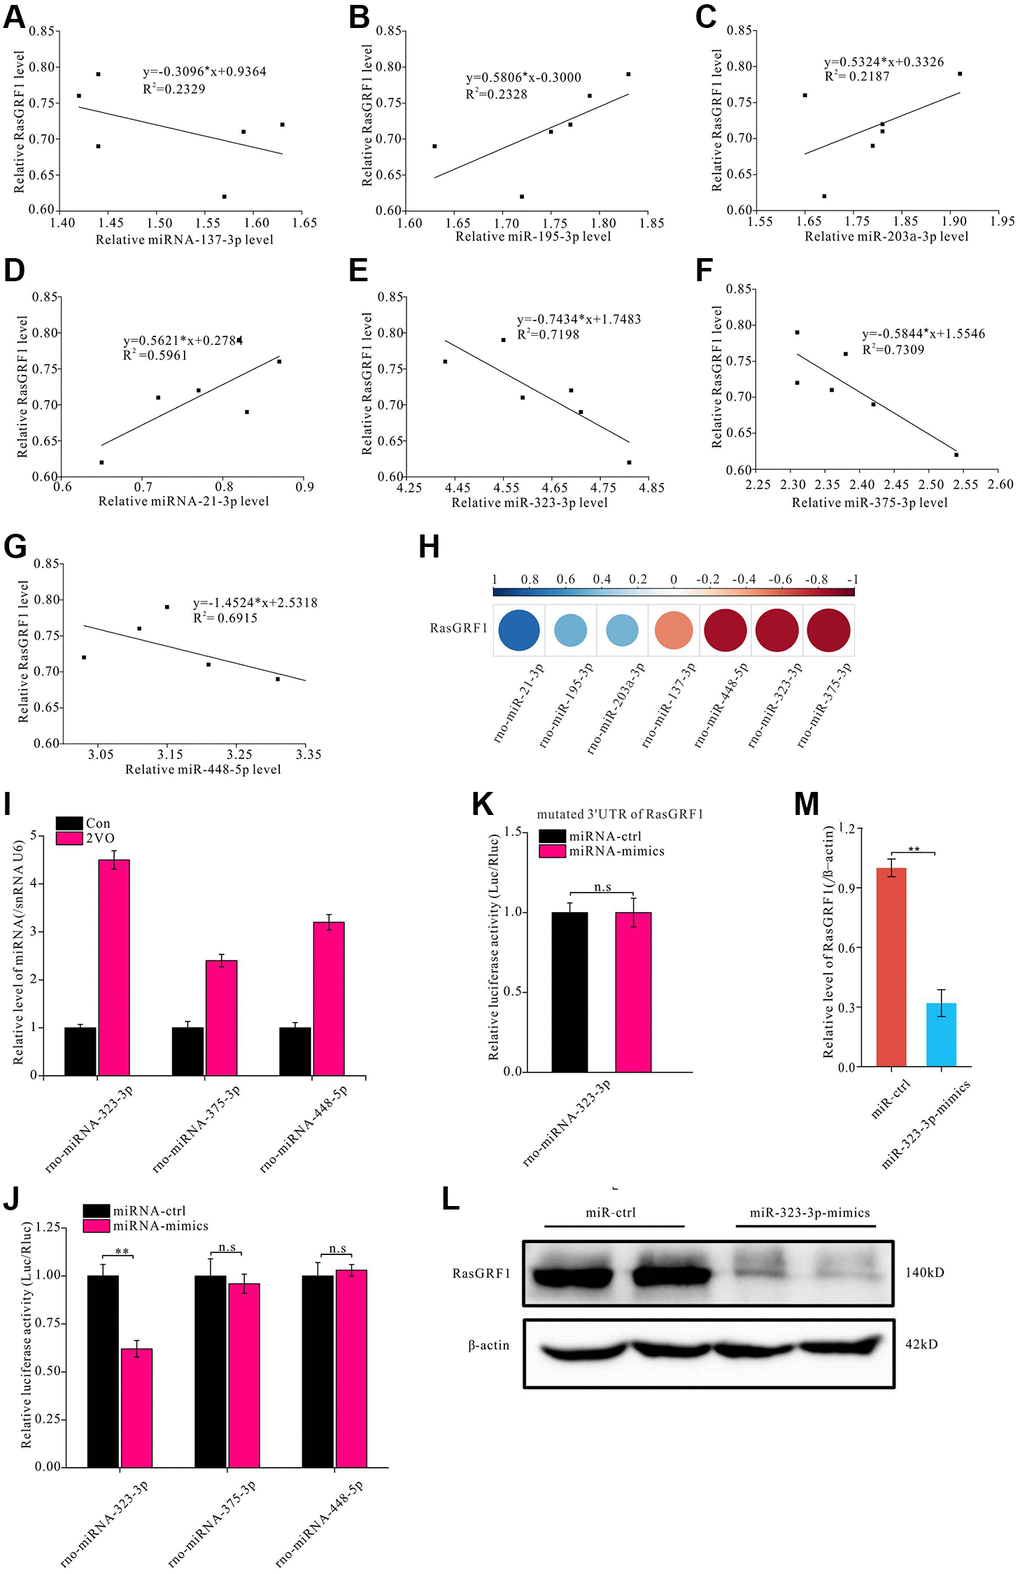 miR-323-3p could regulate the expression of RasGRF1 through binding to the 3′UTR. The total RNAs were extracted, and RasGRF1 and the predicted bind miRNAs levels were measured by RT-PCR. (A–G) The correlation between miRNAs (rno-miR-137-3p, rno-miR-195-3p, rno-miR-203a-3p, rno-miR-21-3p, rno-miR-323-3p, rno-miR-375-3p, rno-miR-448-5p) and RasGRF1 levels were analyzed. (H) The correlation degree was displayed with heatmap. (I) rno-miR-323-3p, rno-miR-375-3p and rno-miR-448-5p level in hippocampus after CCH were showed. (J) Dual luciferase reporter assayed the binding and expression regulation of targeted RasGRF1 mRNAs 3’UTR by miRNA mimics and negative control of miRNA-323-3p, miRNA-375-3p and miRNA-448-5p. (K) The binding and regulation between mutated 3’UTR of RasGRF1 mRNA and miRNA-323-3p was assayed by dual luciferase reporter. (L) RasGRF1 level after rno-miR-323-3p mimic treatment was detected by Western blot. β-actin was as inner control for samples loading normalization. (M) The RasGRF1 relative expression level was calculated and analyzed statistically. Compared with miRNA-Control, **p 